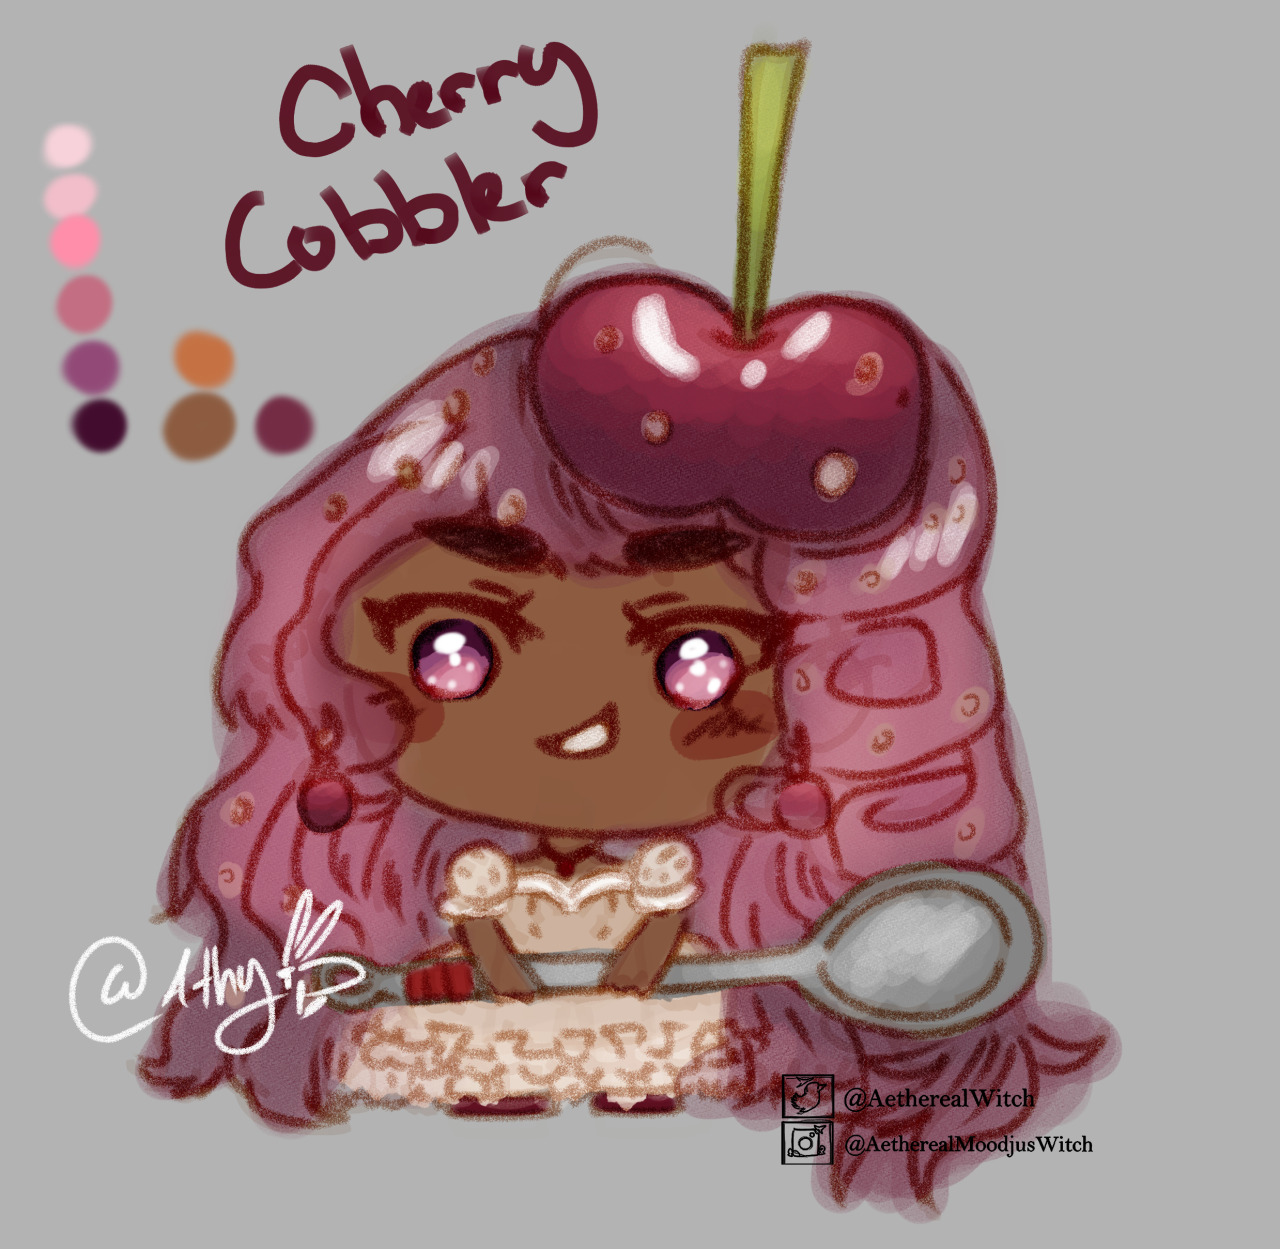 Cute Cherry cobbler Princess #cherry cobbles#dessert#chibi art#original character#chibi girl#chibi doodles#chibi style#AthywitchDoodles#commisions open#cherry cobbler#dessert princess #testing out new chibi style  #i love the coloring  #now what dessert to draw next